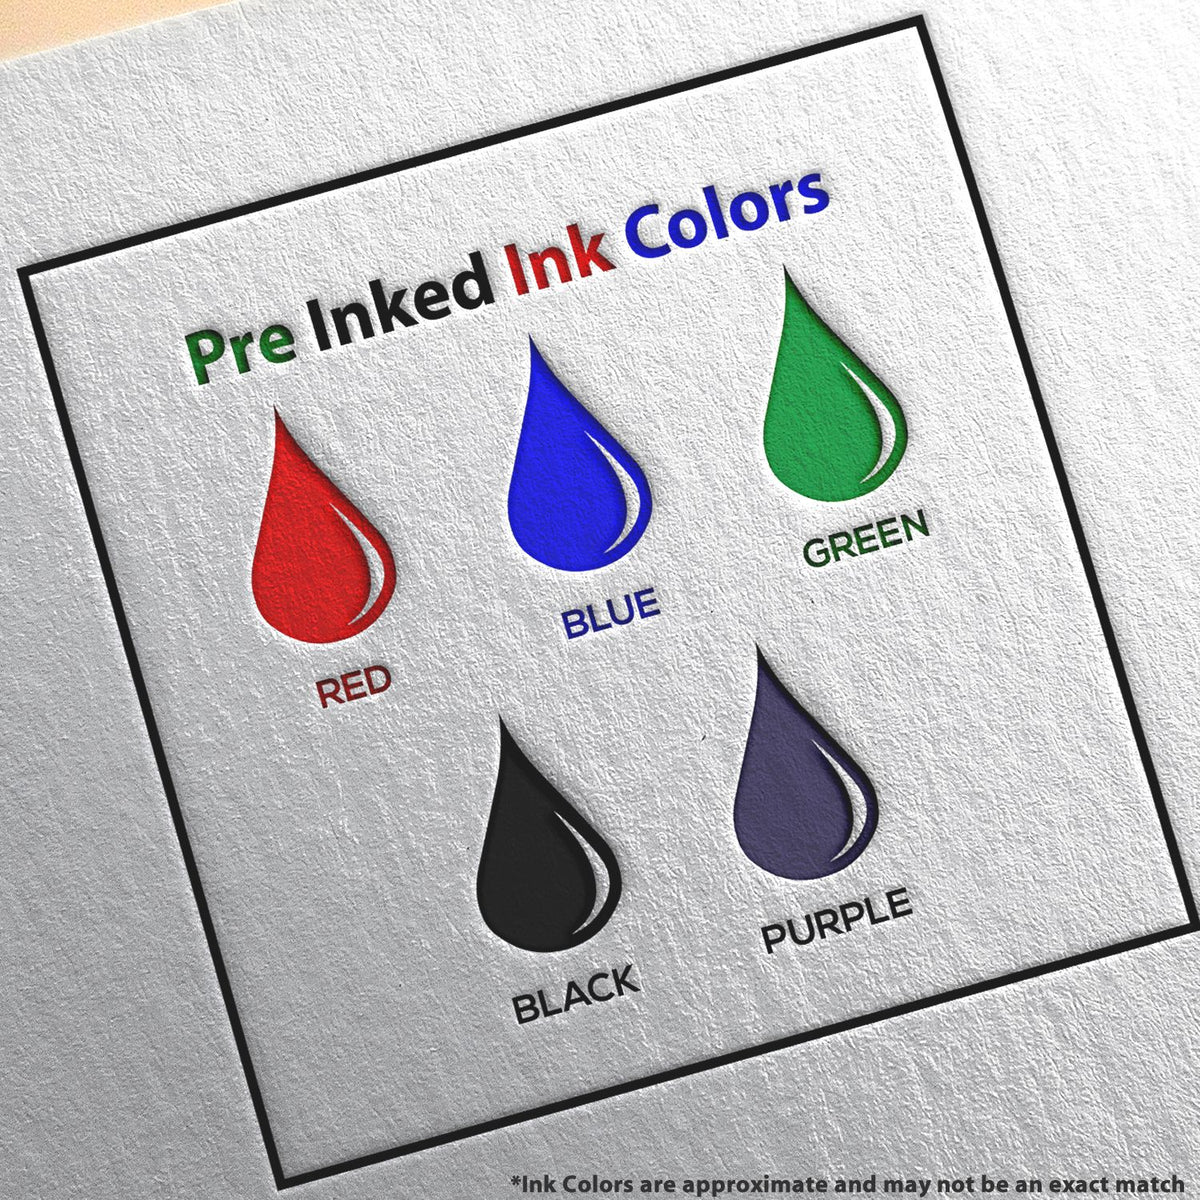 A picture showing the different ink colors or hues available for the Slim Pre-Inked Maine Landscape Architect Seal Stamp product.